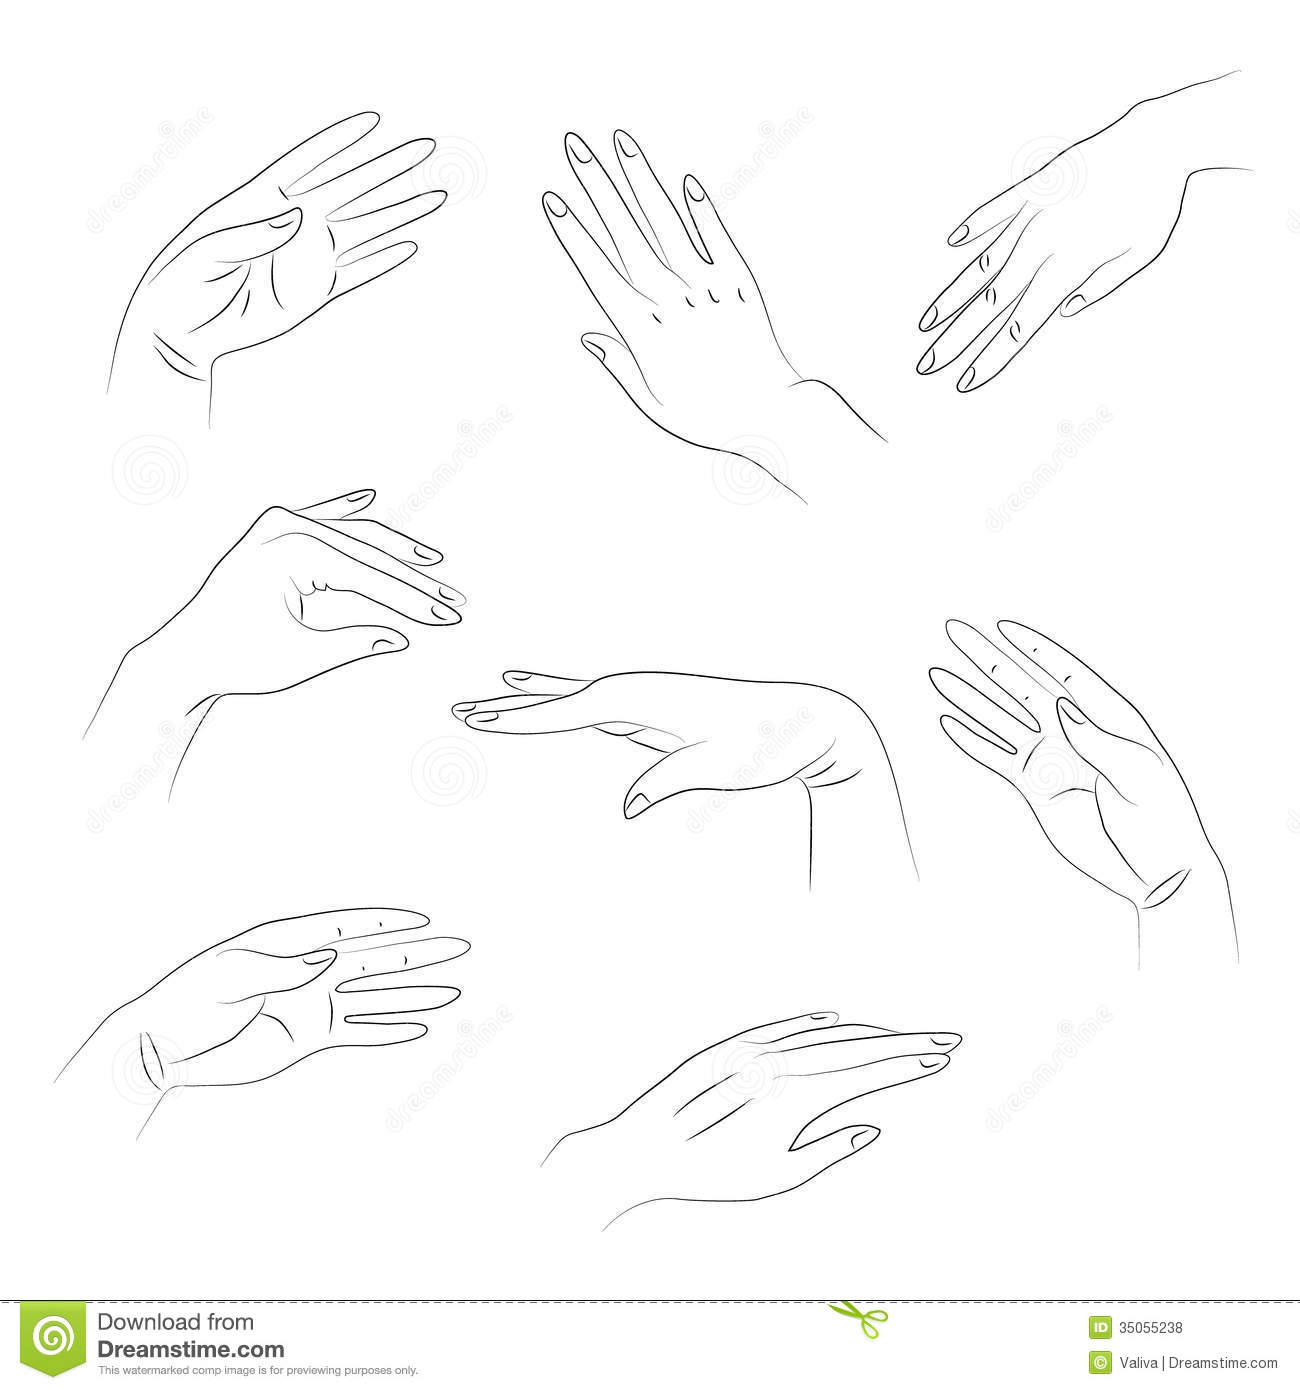 Outlines Of Hands Royalty Free Stock Photos   Image  35055238